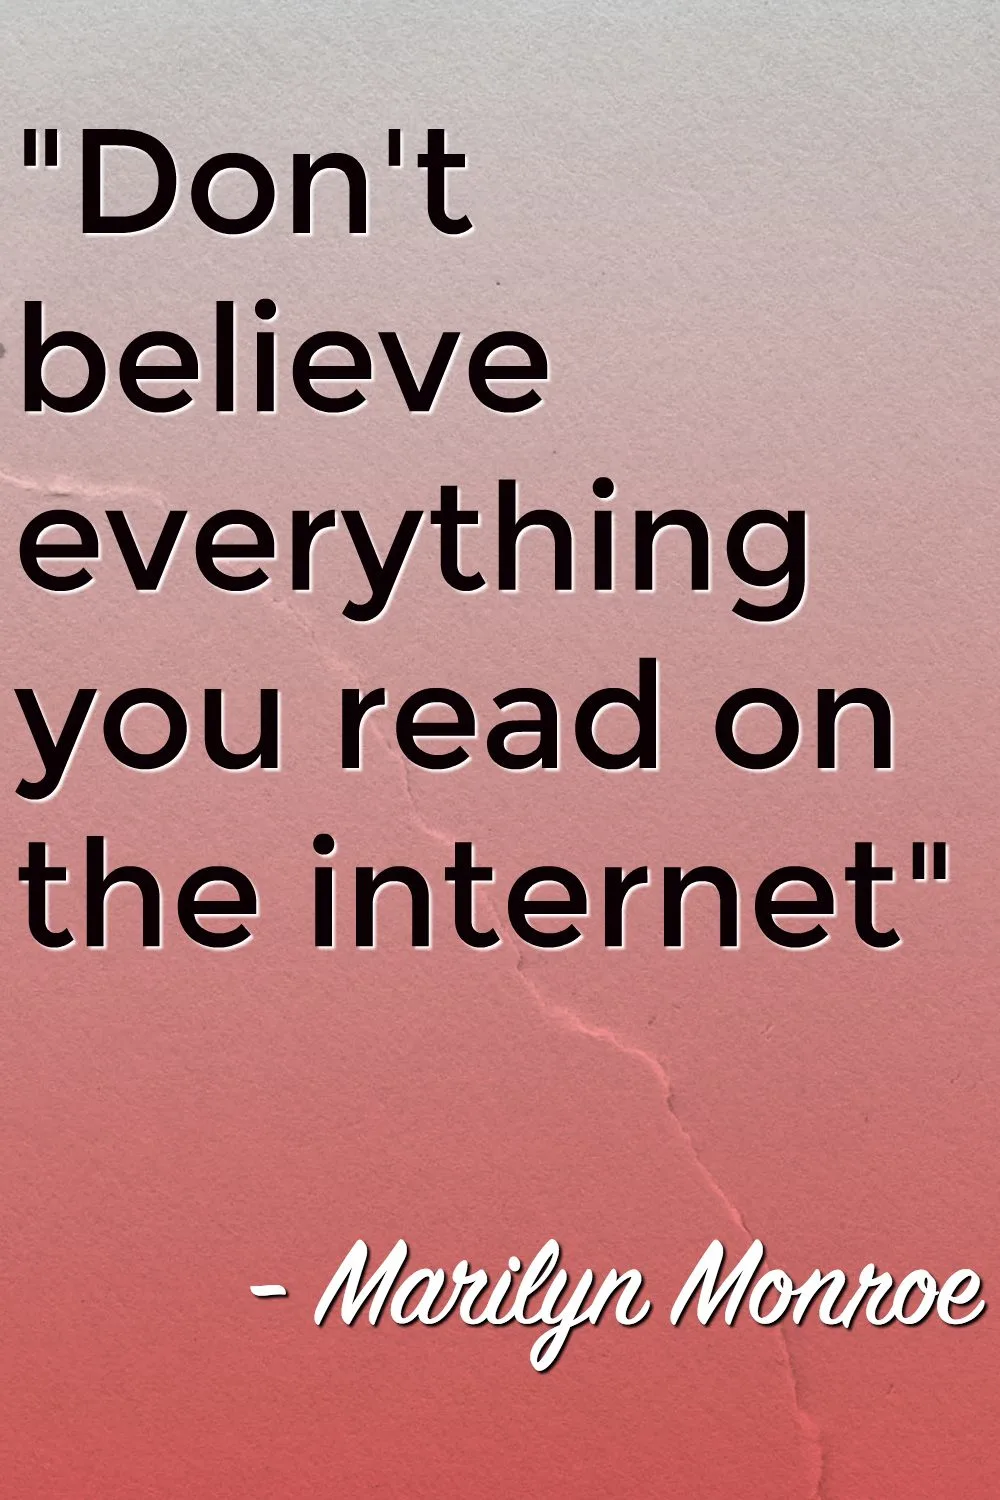 Don't believe everything you read on the internet quote